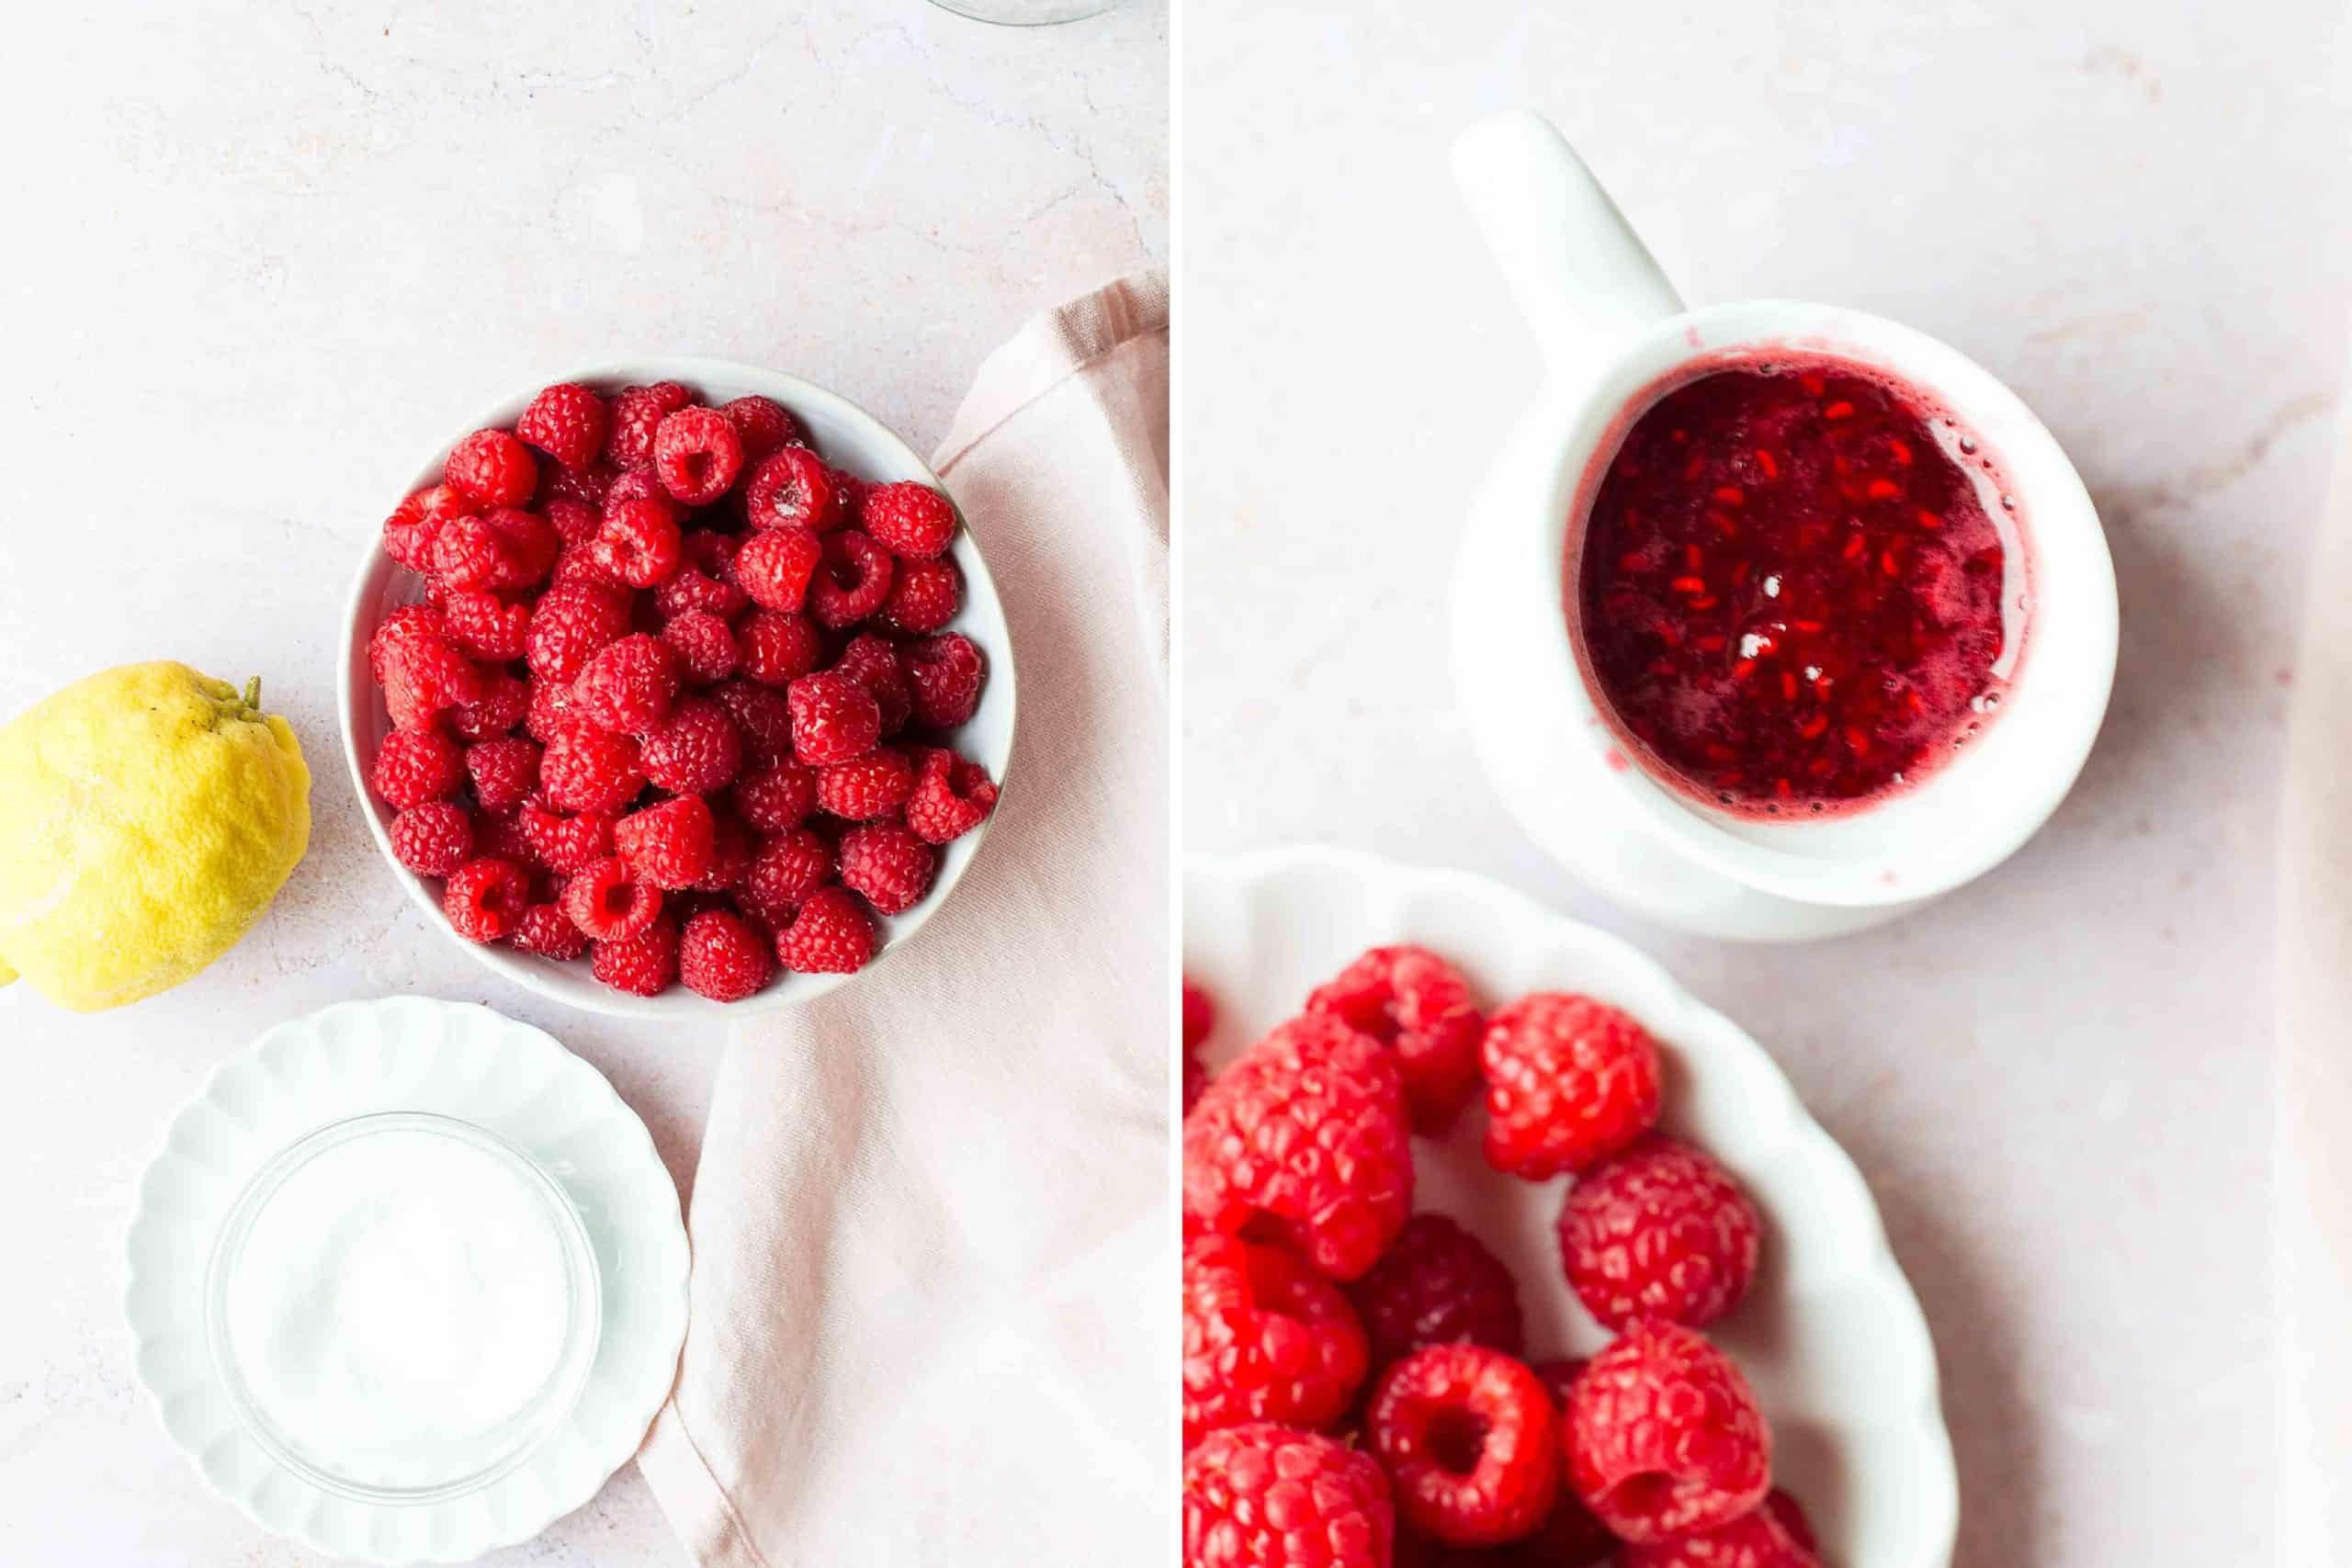 Diptych of raspberry sauce ingredients and the finished sauce.